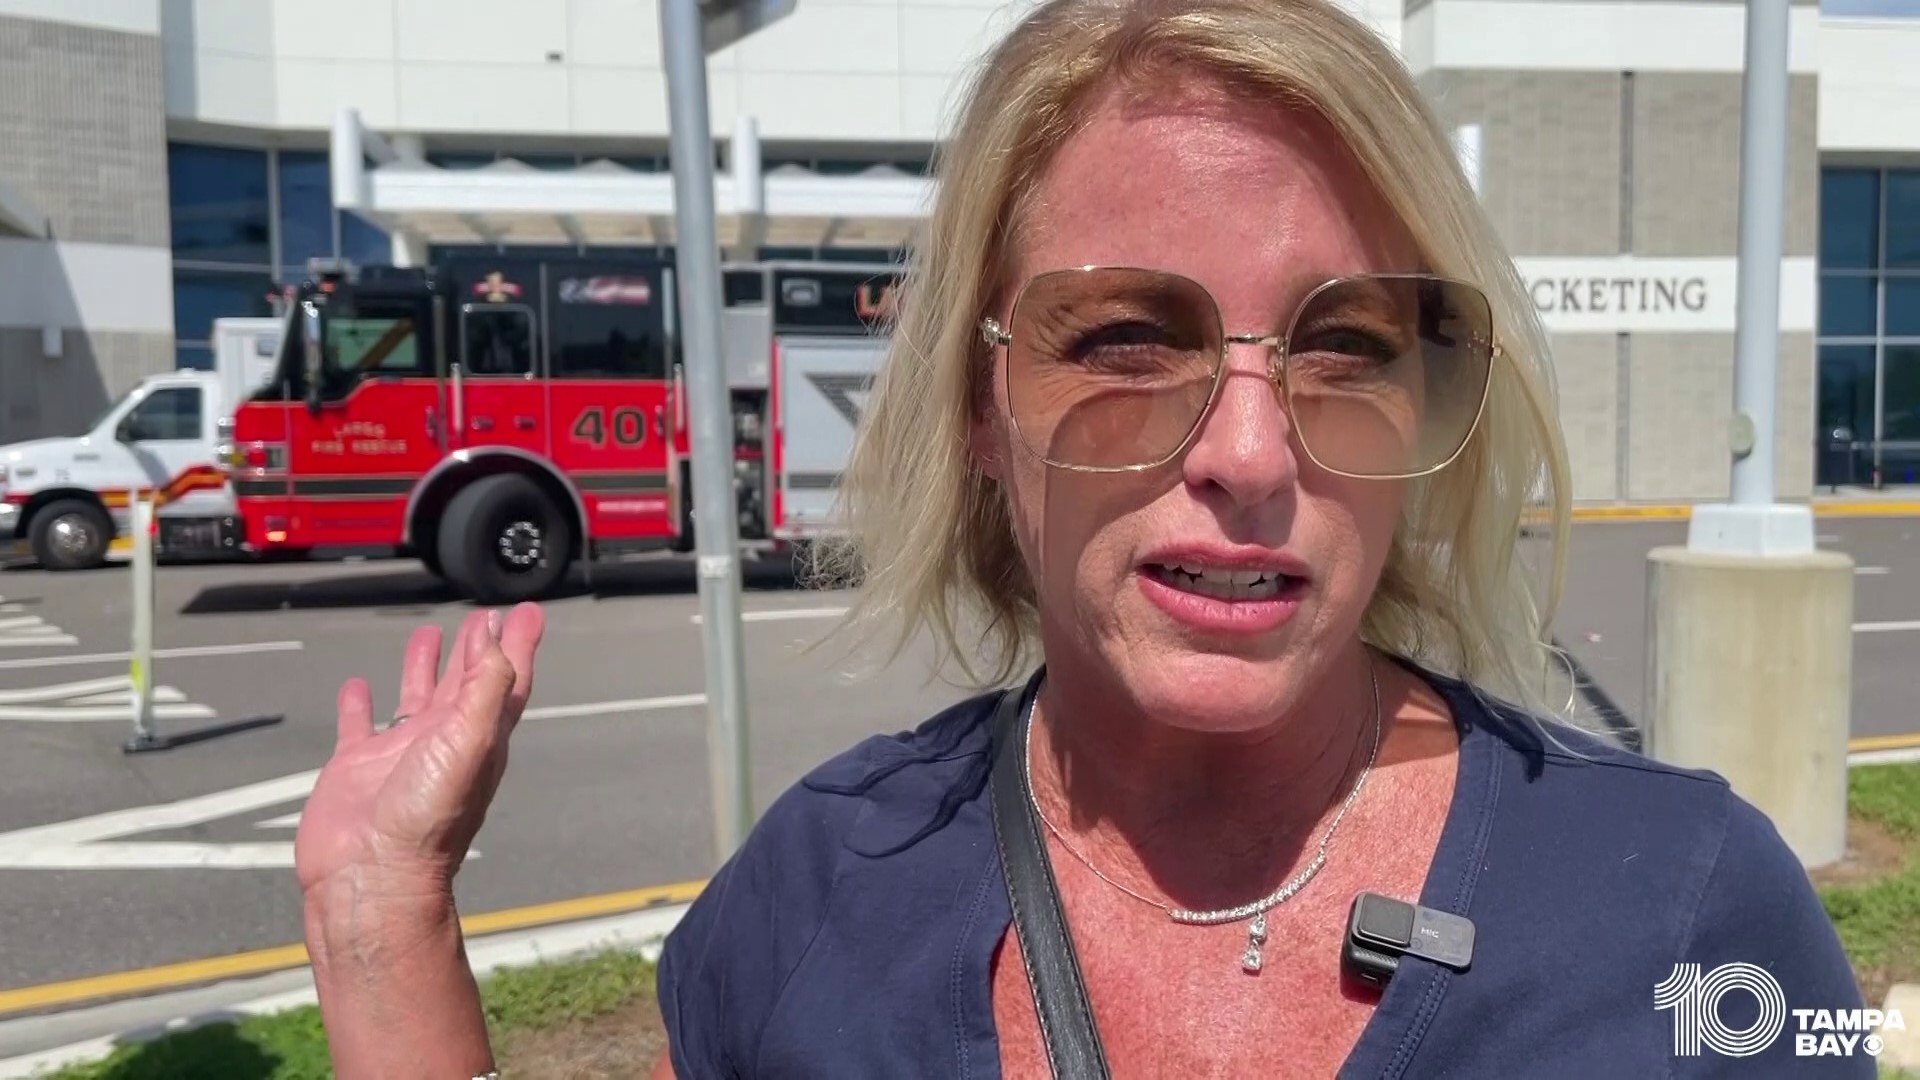 Passenger Lisa Spriggs recalled the injuries sustained during "terrifying" encounter with turbulence on Allegiant flight.